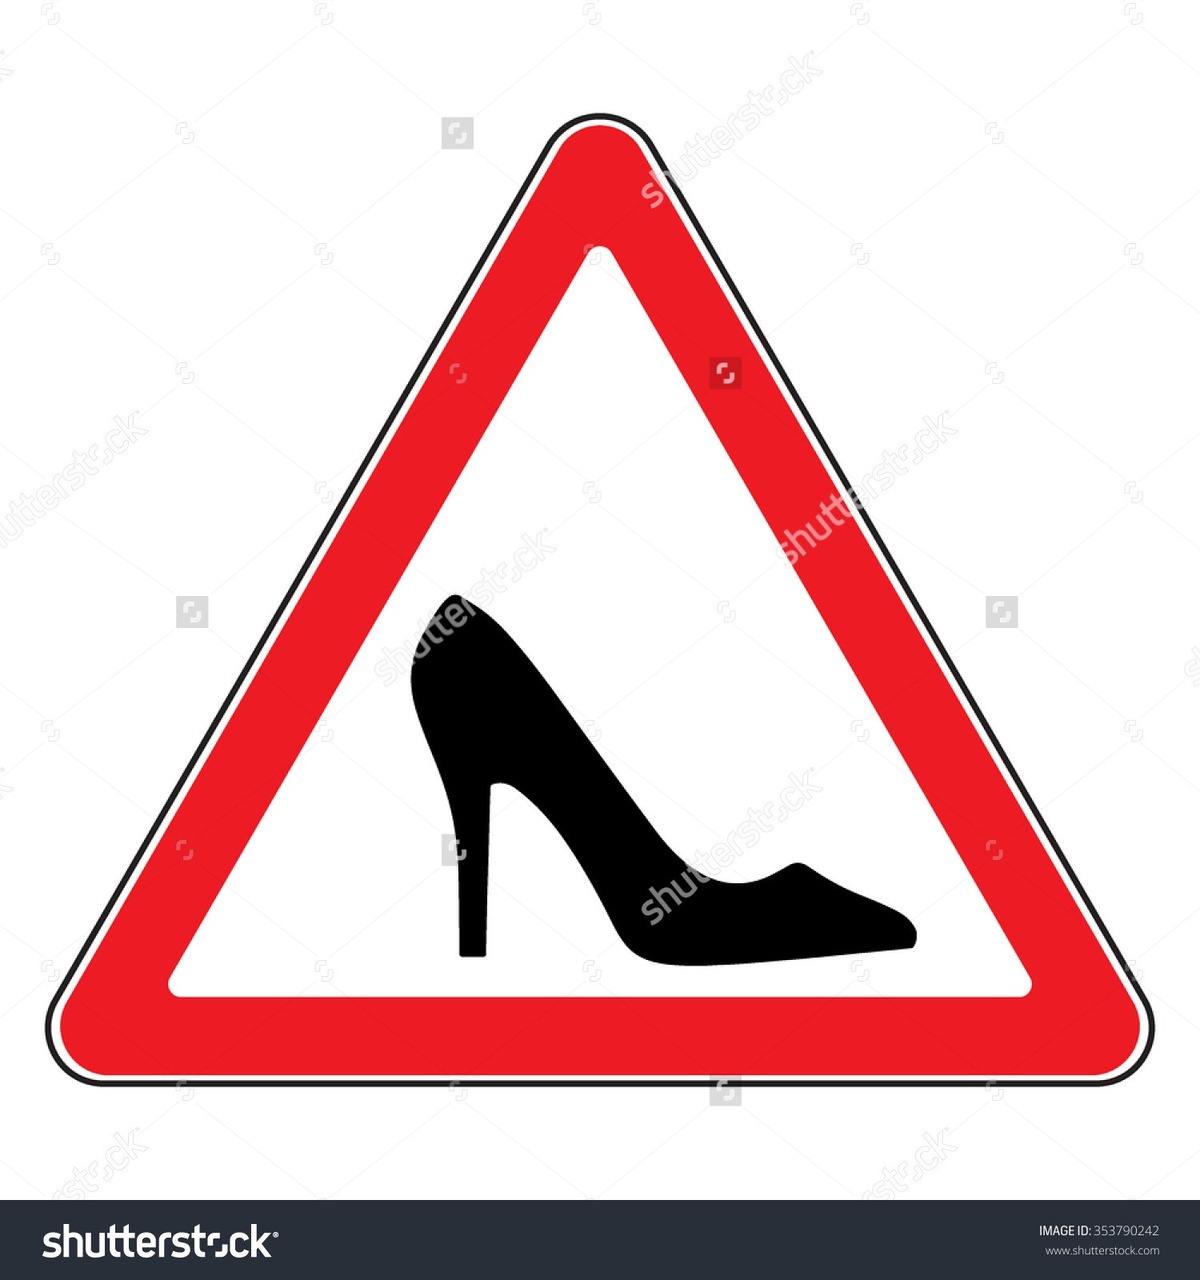 stock-vector-high-heel-shoes-road-sign-elegant-black-silhouette-information-icon-female-driver-symbol-353790242